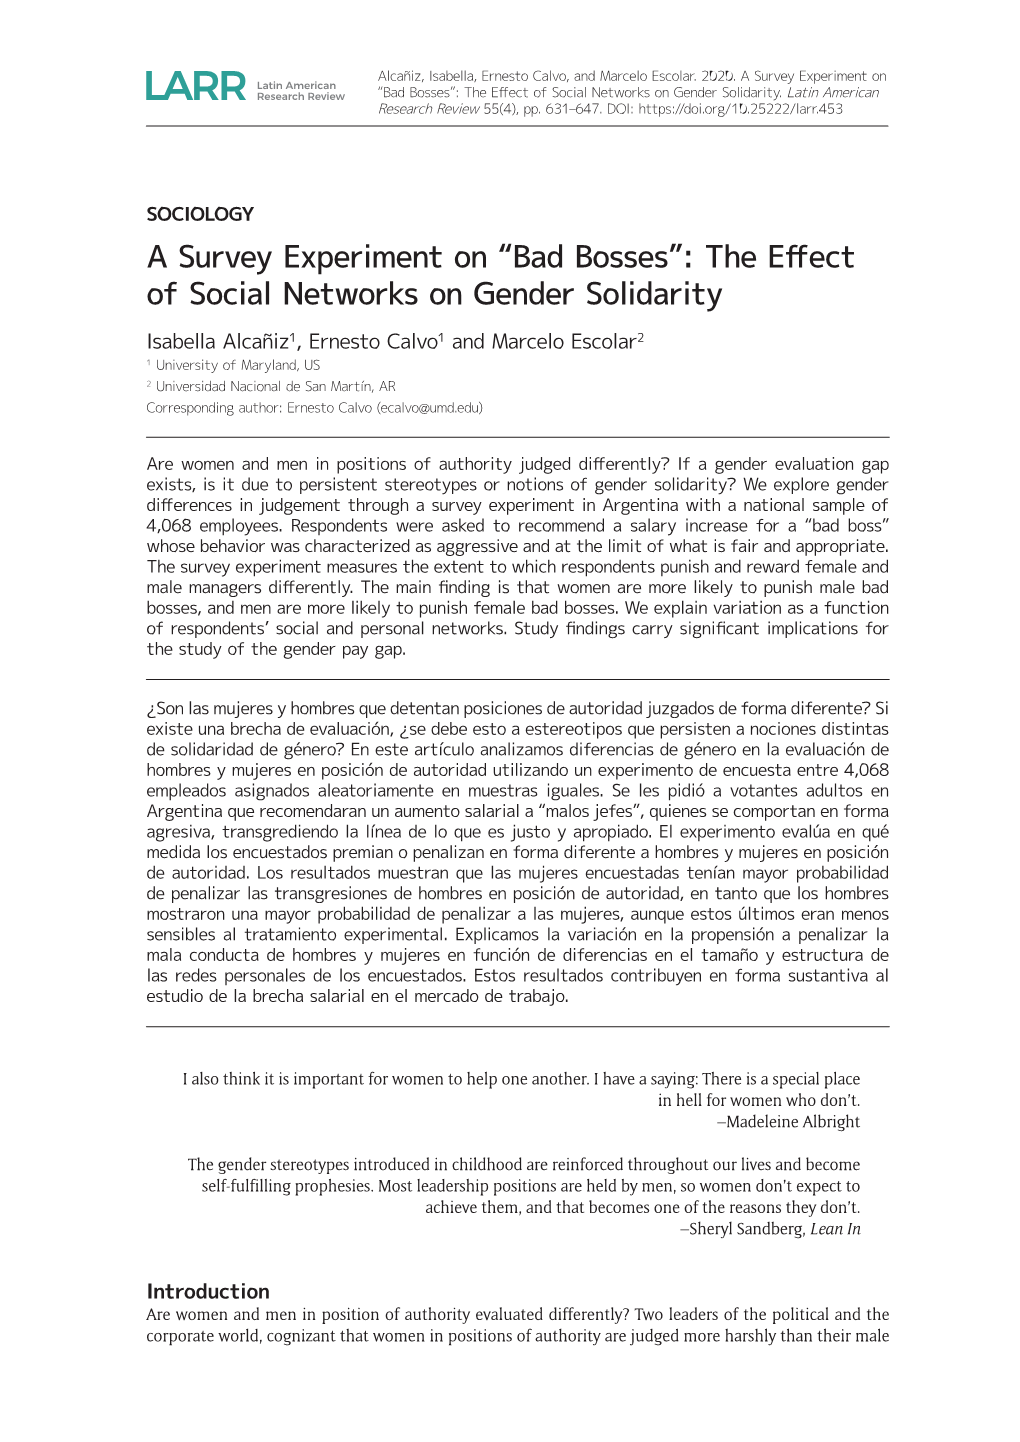 A Survey Experiment on “Bad Bosses”: the Effect of Social Networks on Gender Solidarity.Latin American Research Review 55(4), Pp